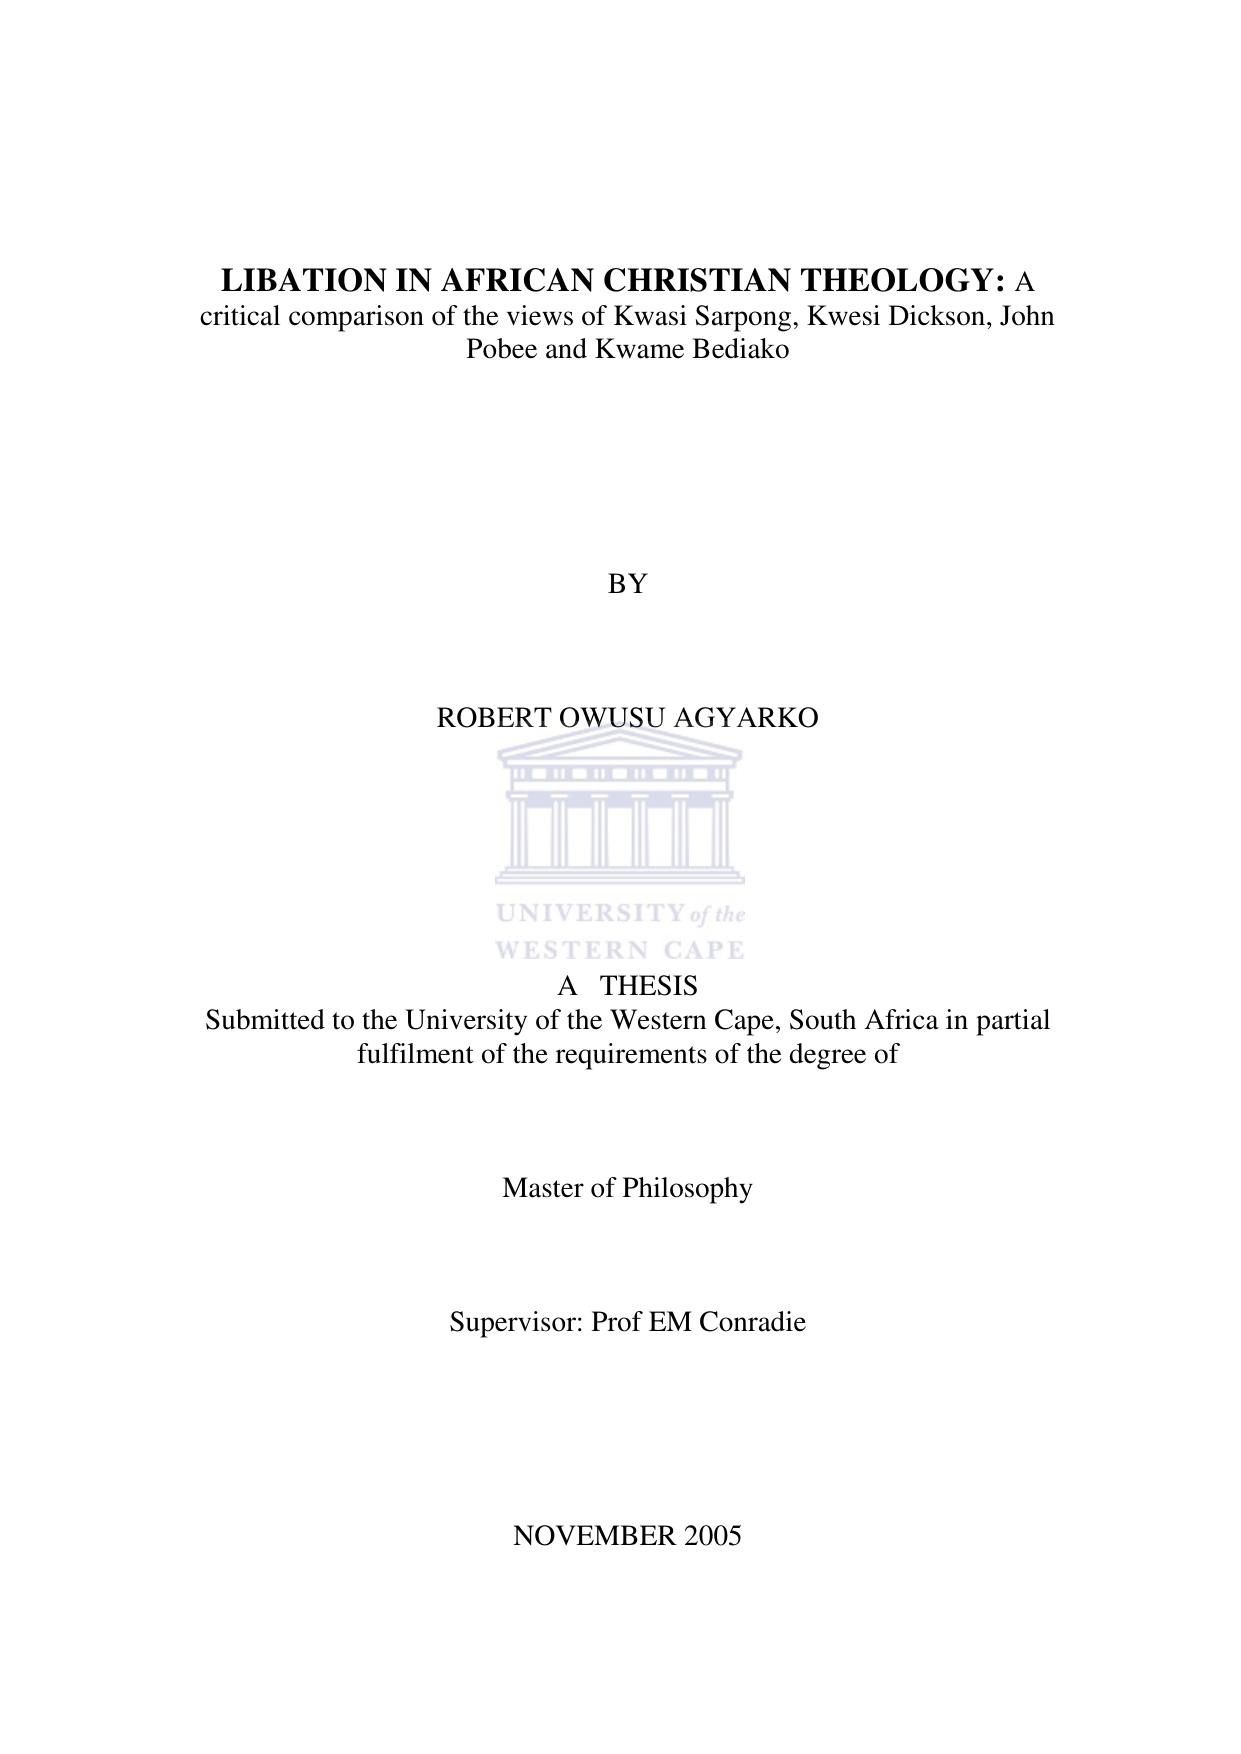 LIBATION IN AFRICA CHRISTIAN THEOLOGY:  A critical comparision of the views of Kwasi Sarpong, Kwesi Dickson, John Pobee and Kw